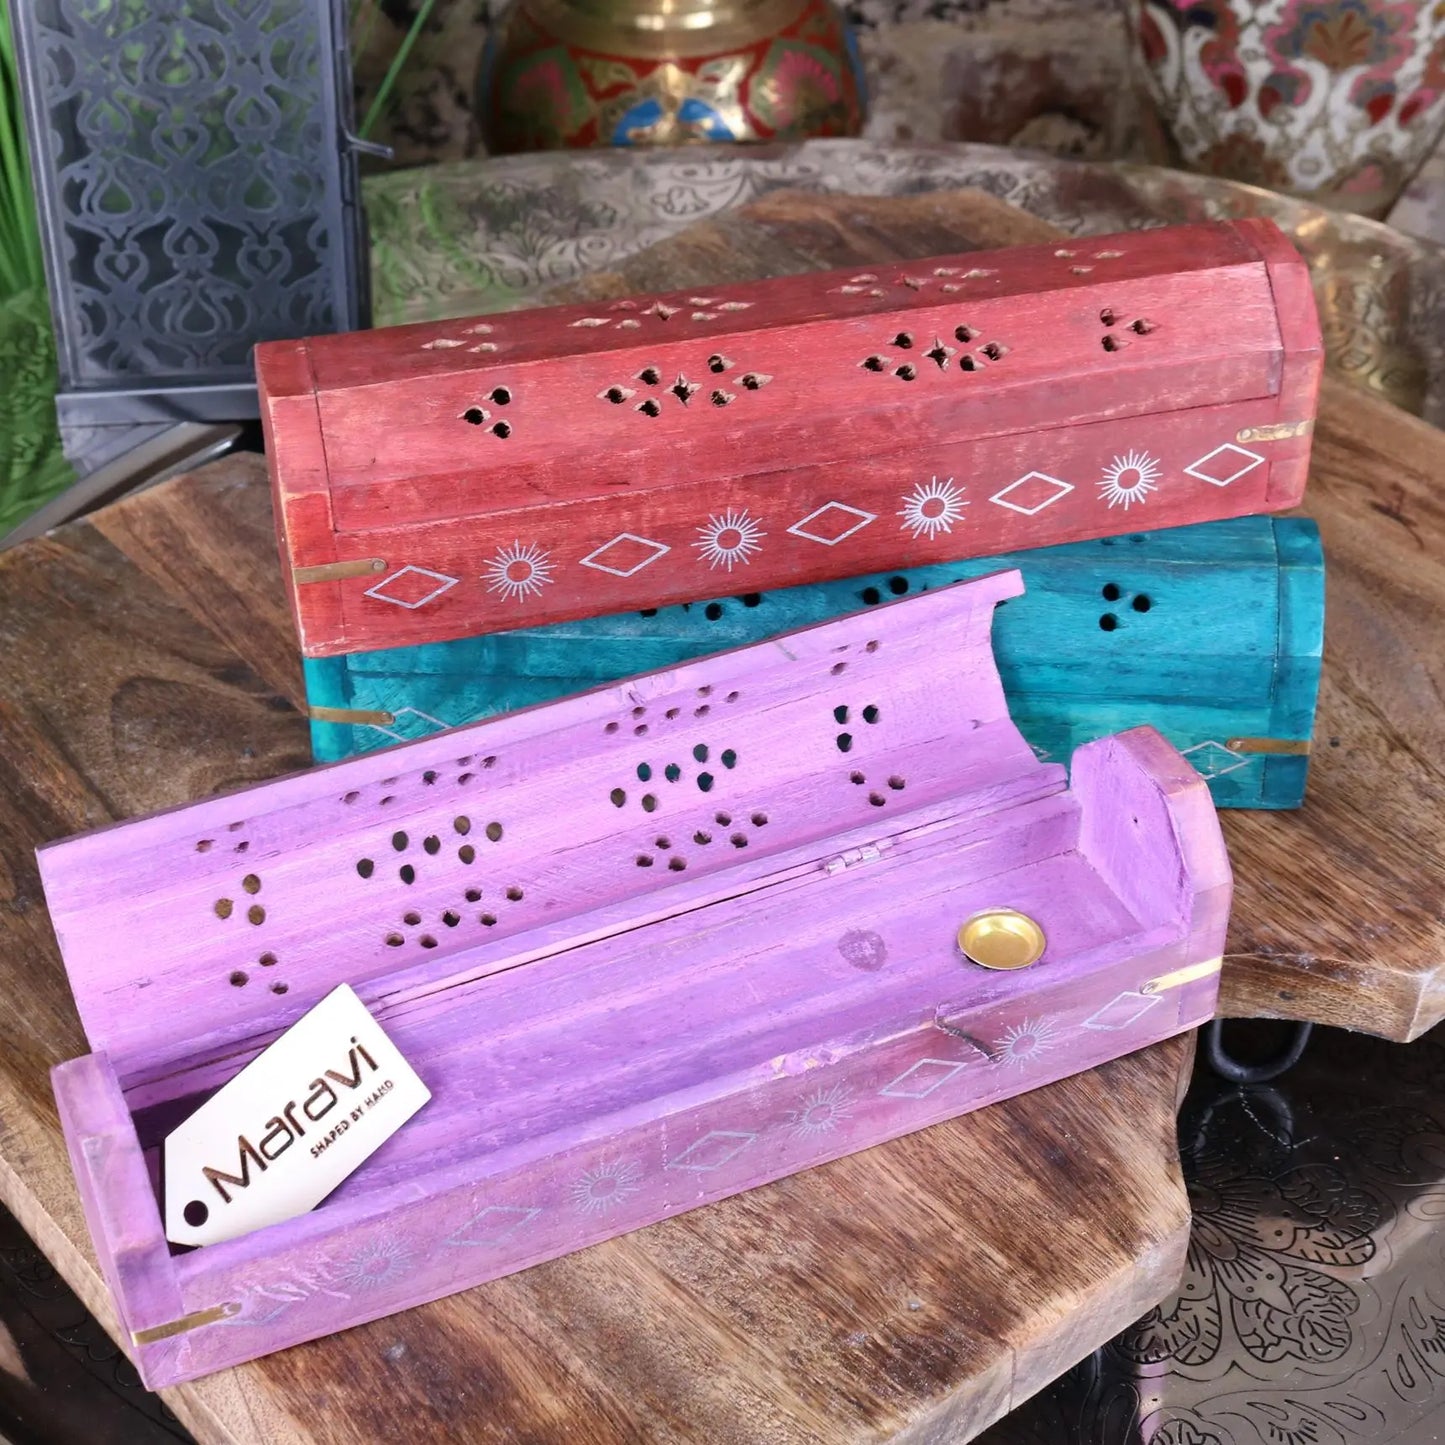 Simri Set of 3 Ash Catcher Boxes for Incense Sticks - Pink box showing Inside